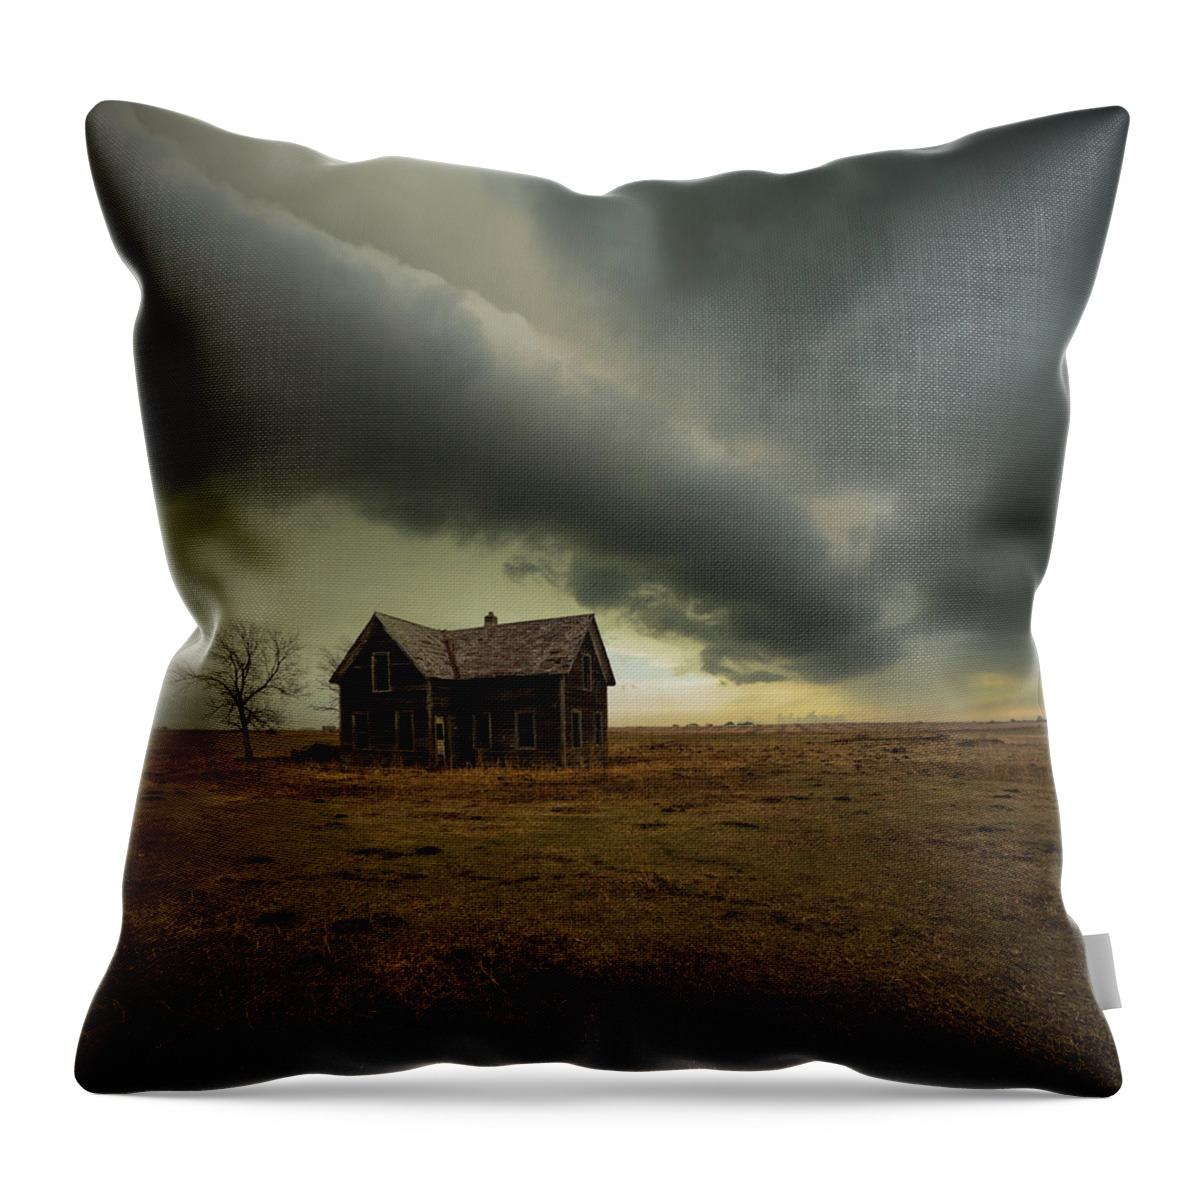 Roll Cloud Throw Pillow featuring the photograph Before It's Too Late by Aaron J Groen